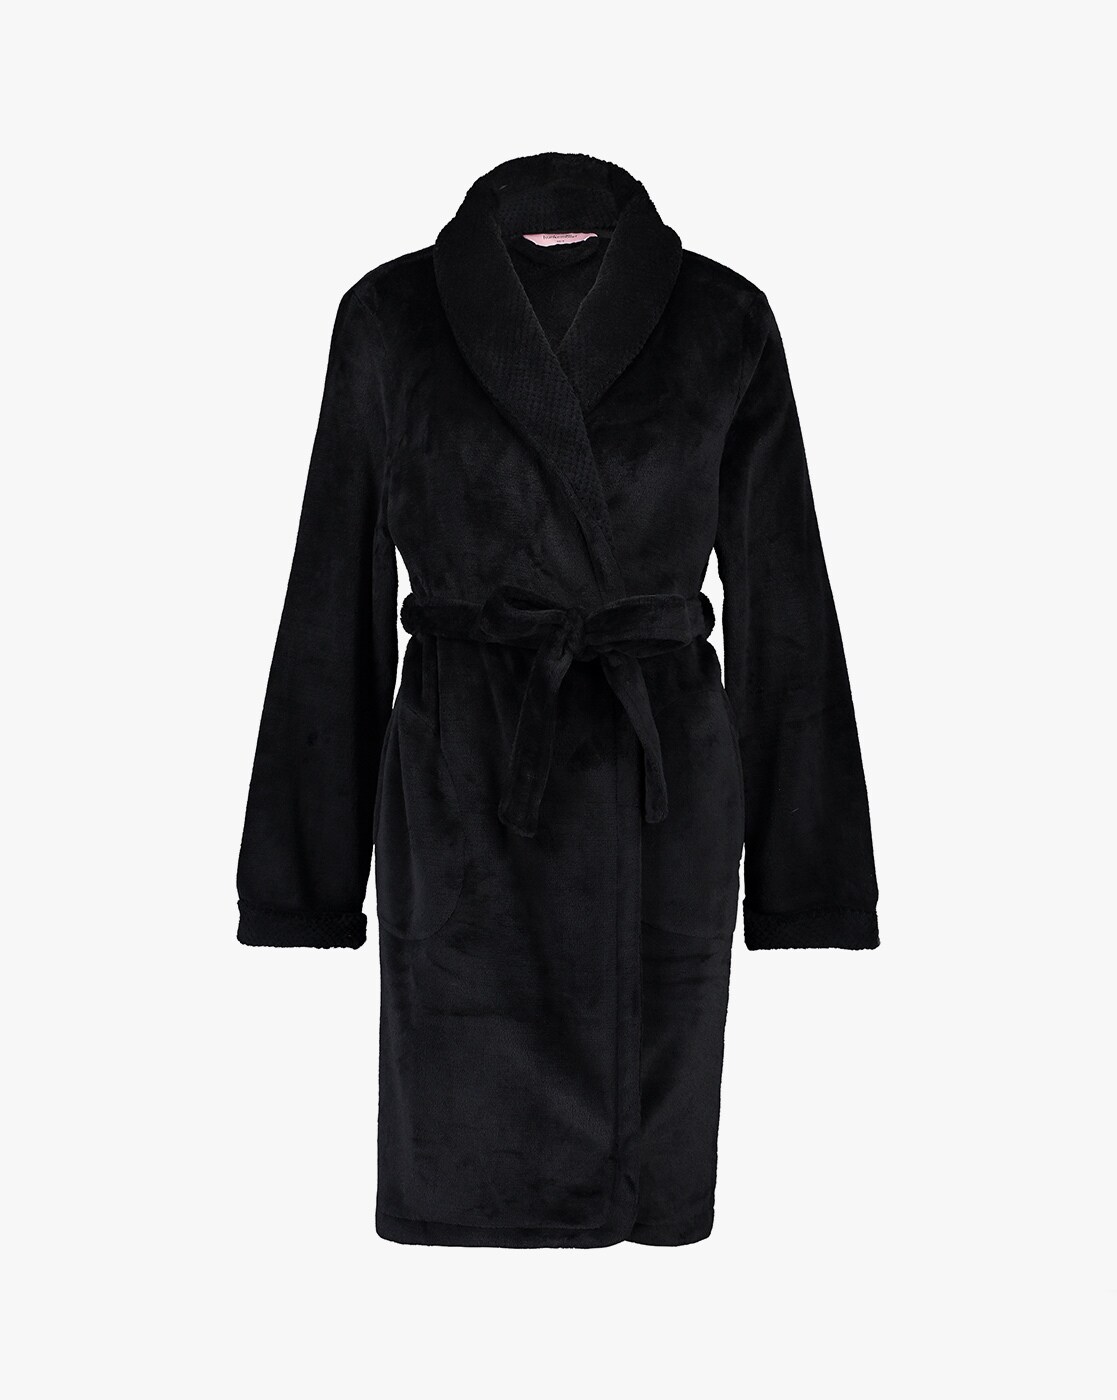 Womens Ladies Dressing Gown Hooded Fleece Lined Fluffy Snuggle Soft Warm  Robe | eBay